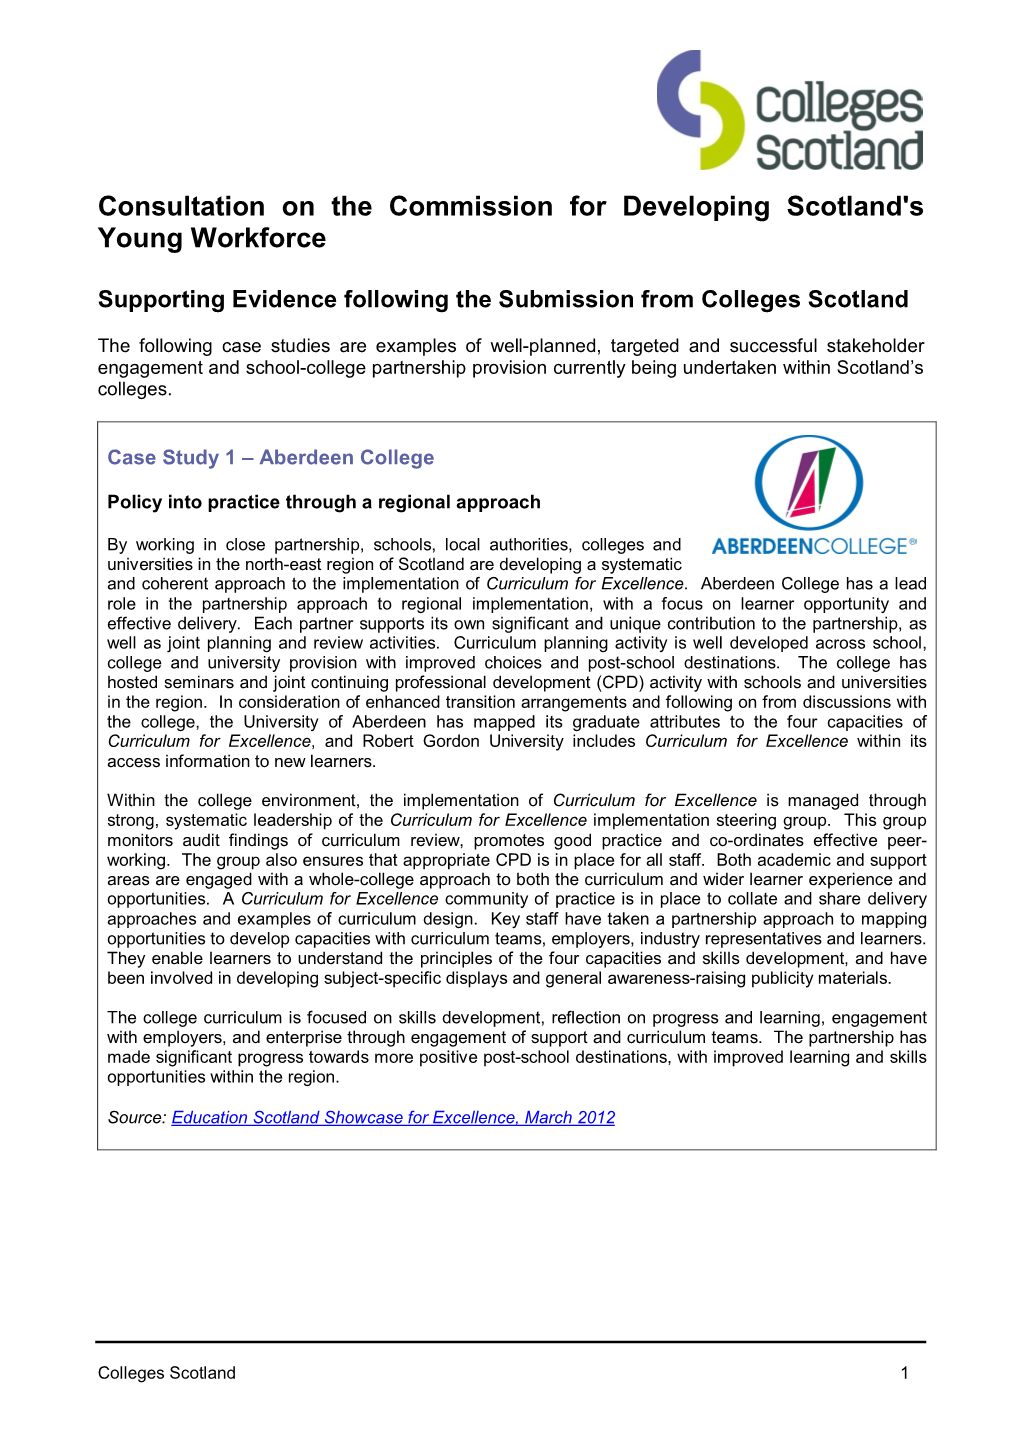 Consultation on the Commission for Developing Scotland's Young Workforce